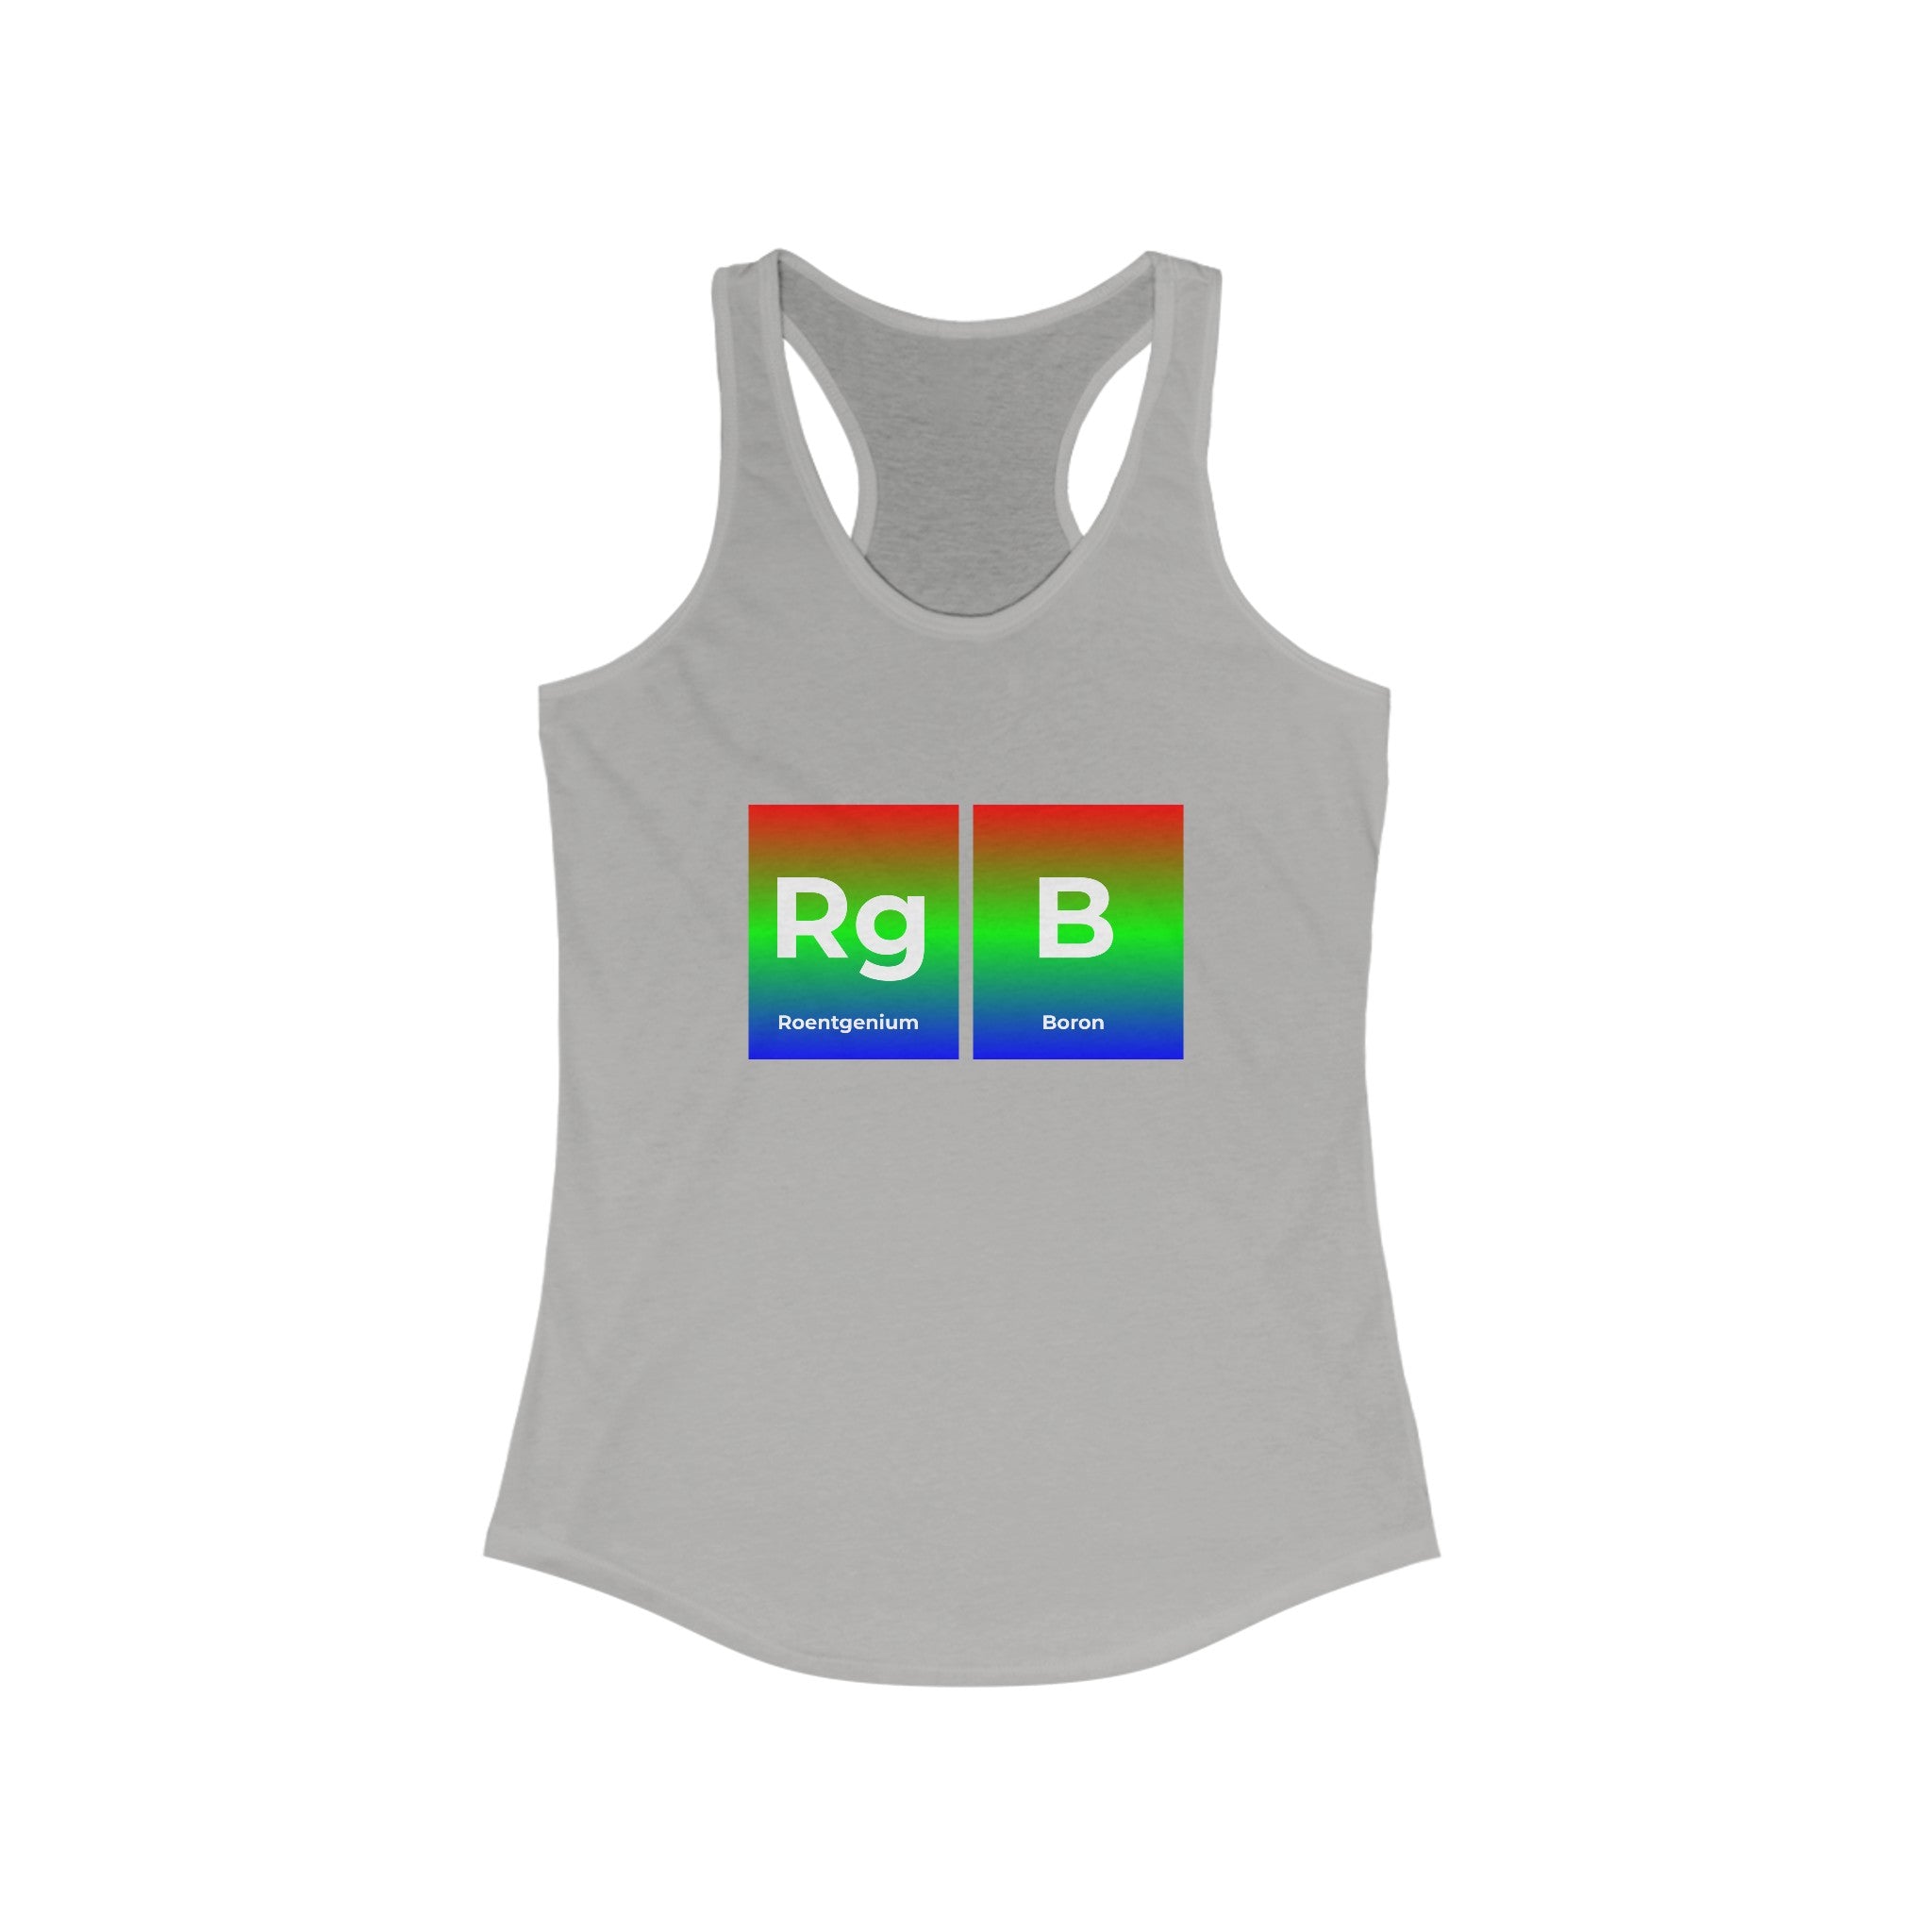 High-quality RG-B - Women's Racerback Tank, ideal for an active lifestyle, featuring a periodic table design with elements Roentgenium (Rg) and Boron (B) on red, green, and blue gradient backgrounds.